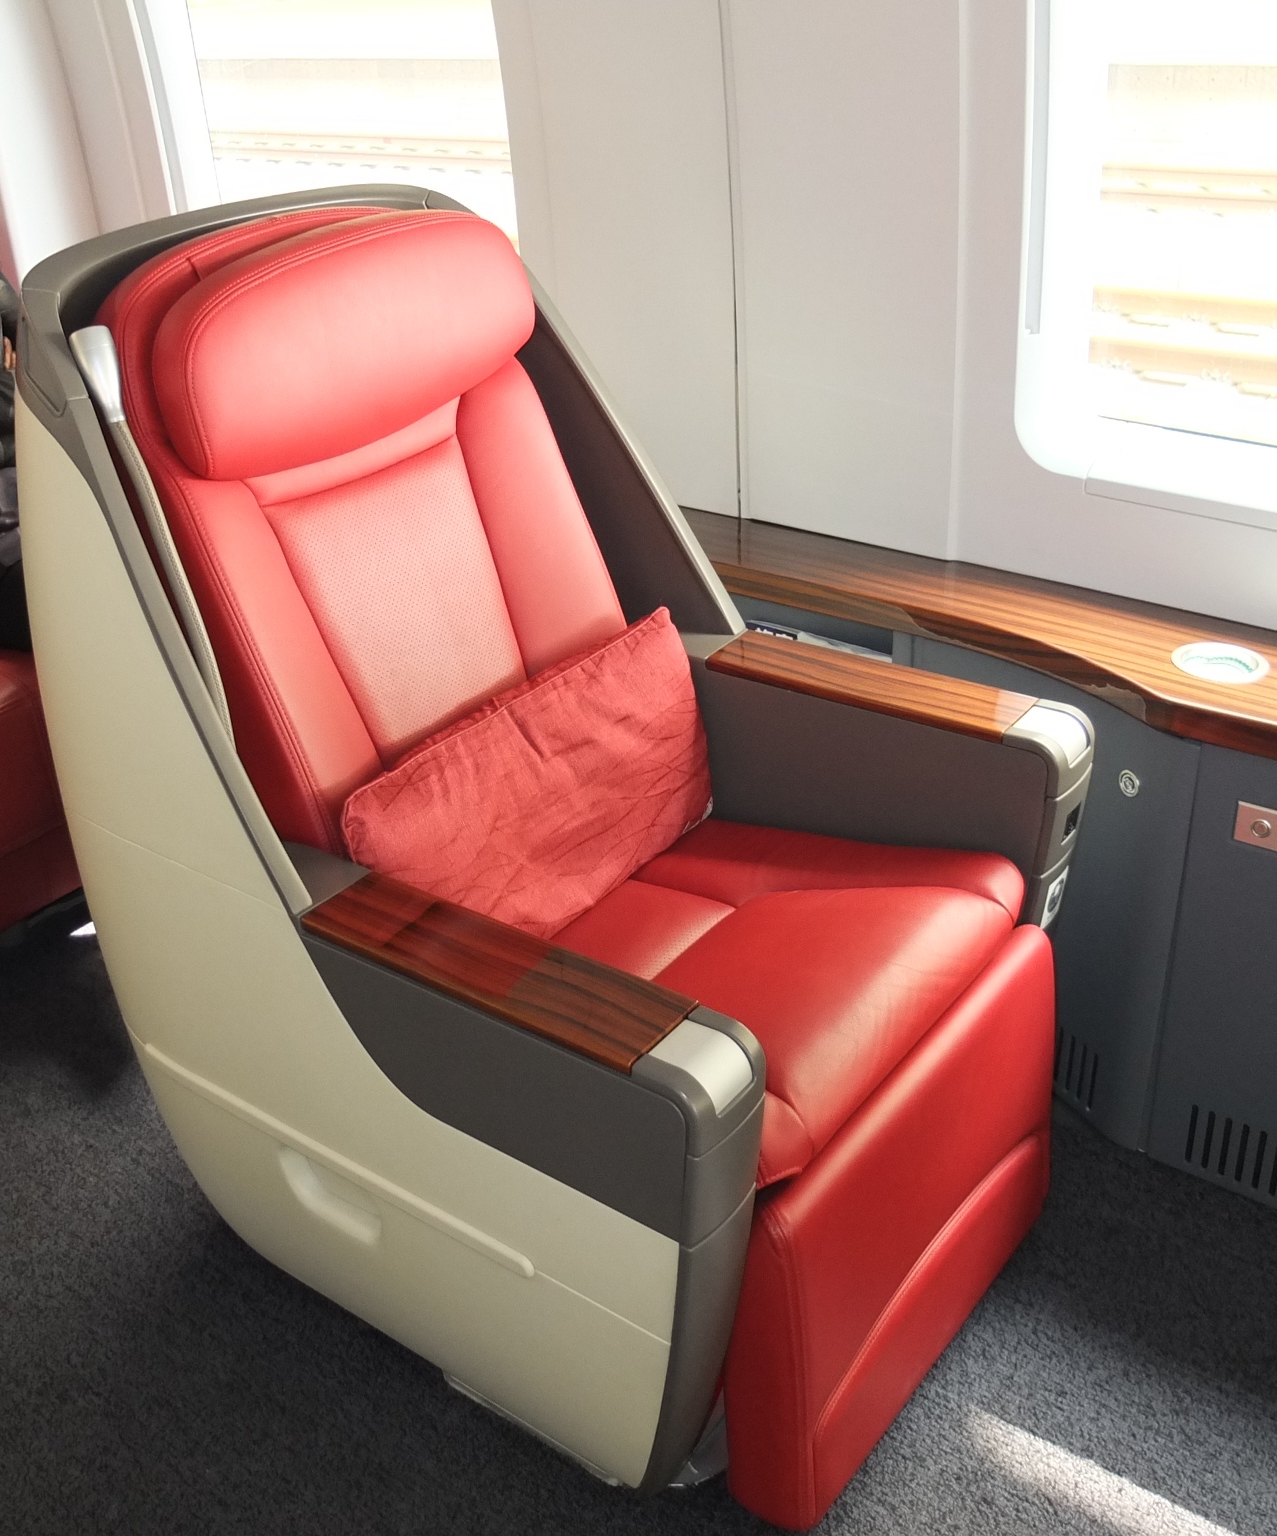 Three Crestapol 1212 RTM composite parts were used by Cedar Composites, Shanghai to construct the VIP chairs installed in high speed trains now operating in China.